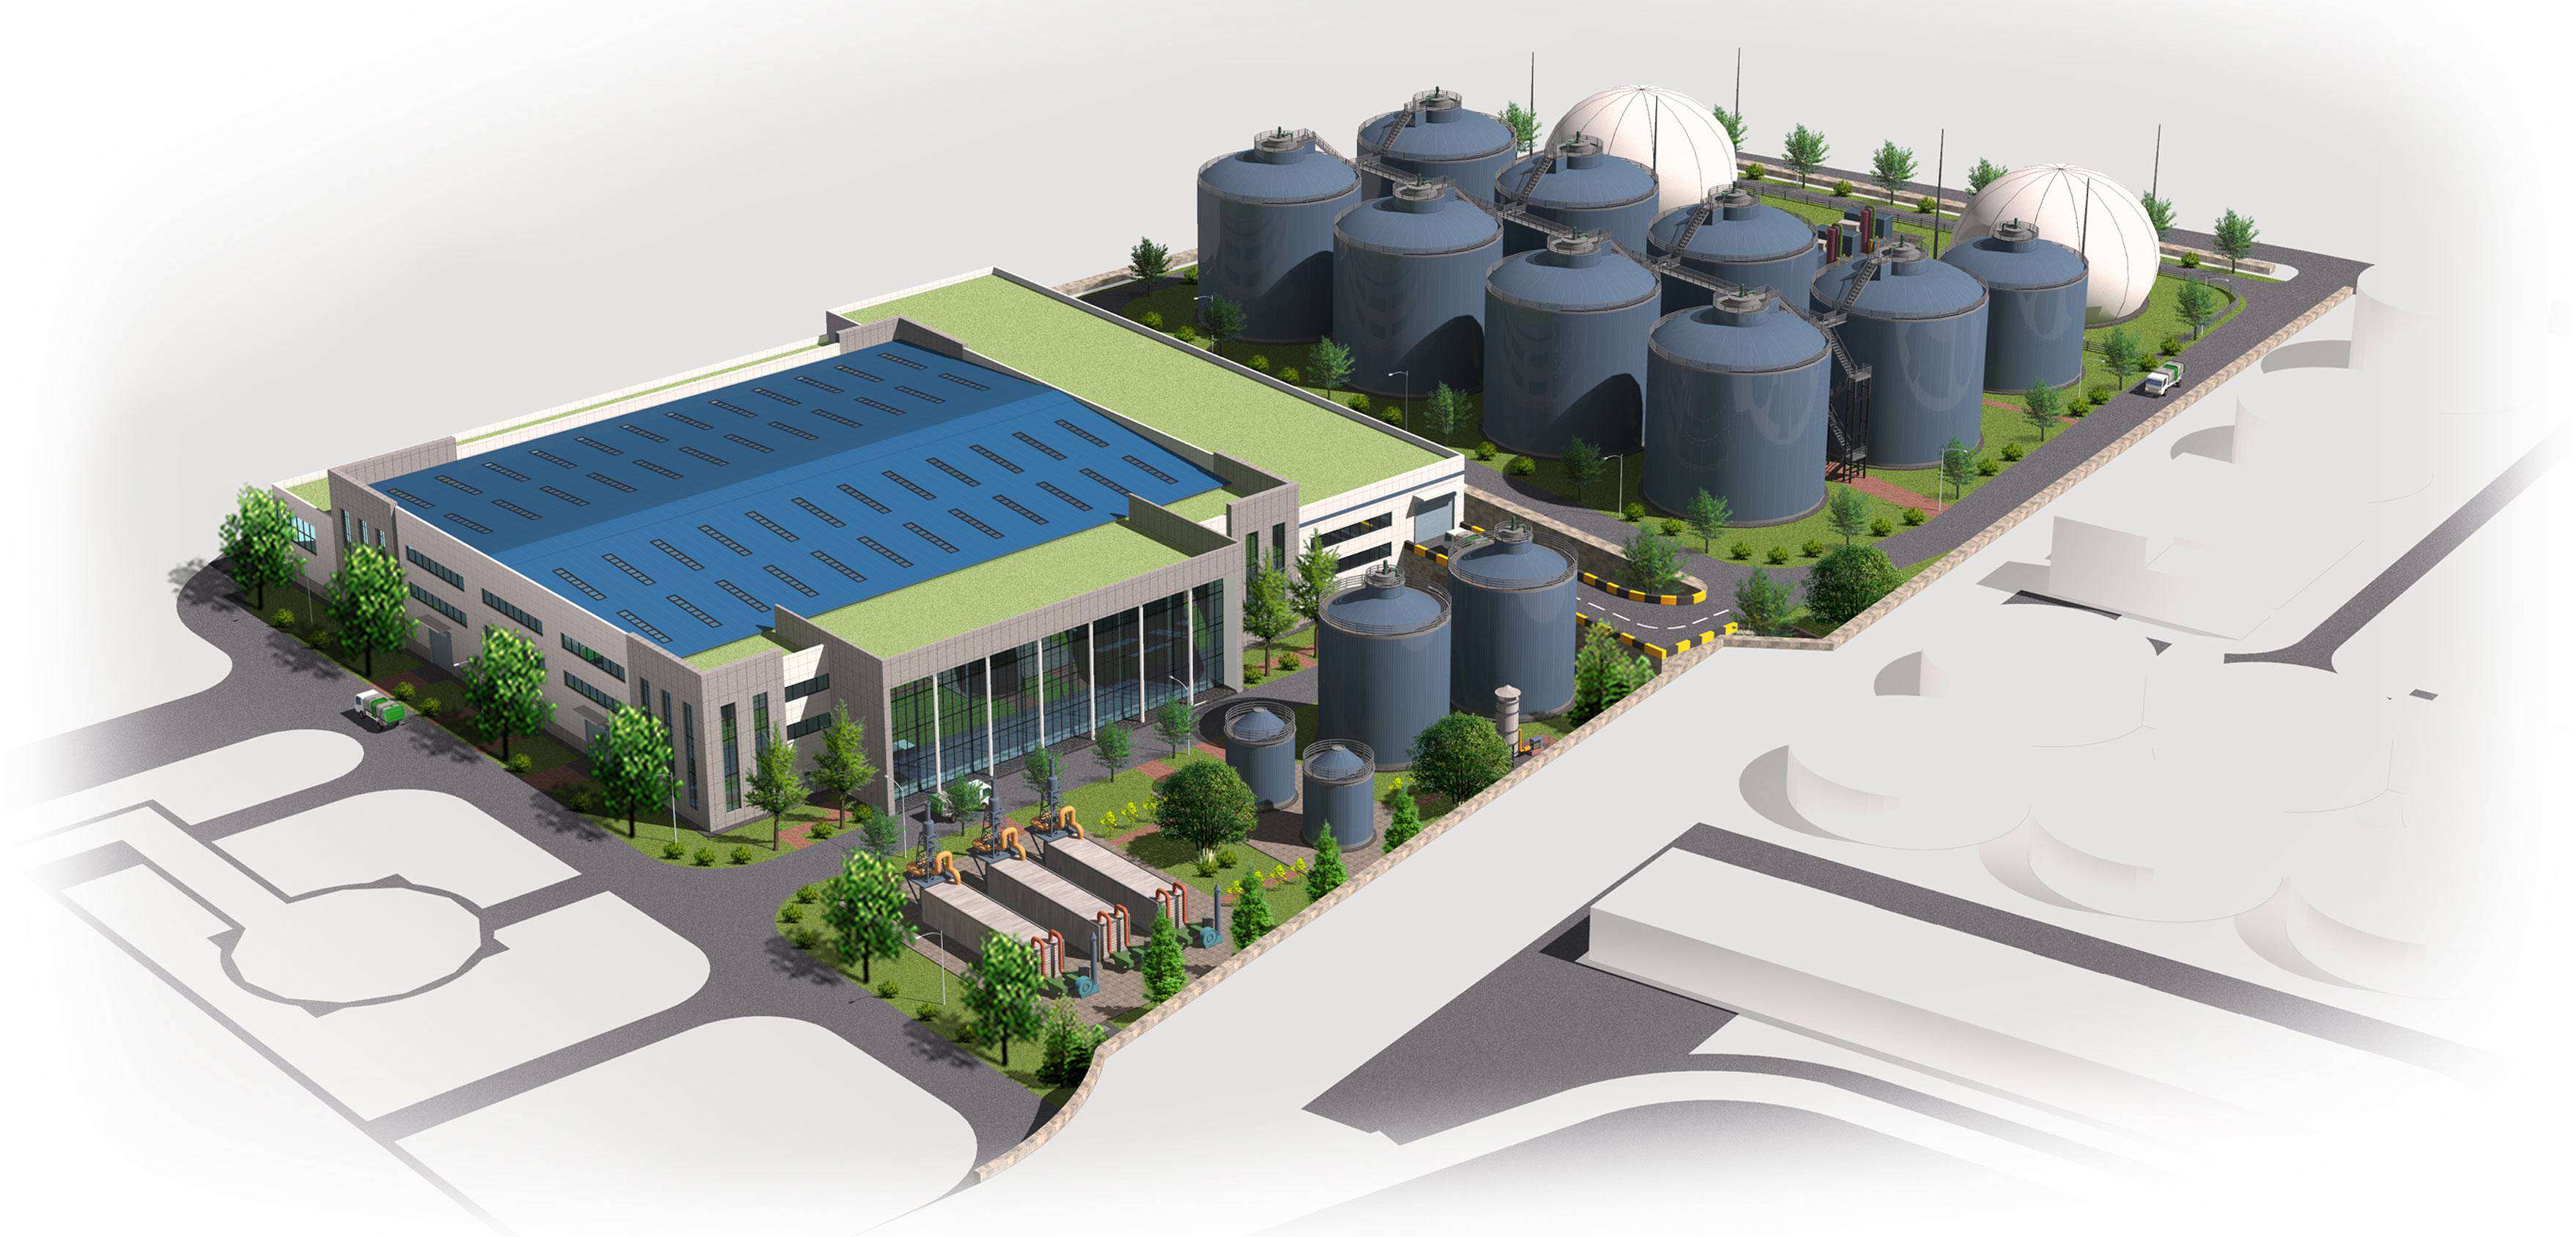 Guangzhou East Solid Resources Regeneration Center (Luogang Fushan Circular Economy Industrial Park)